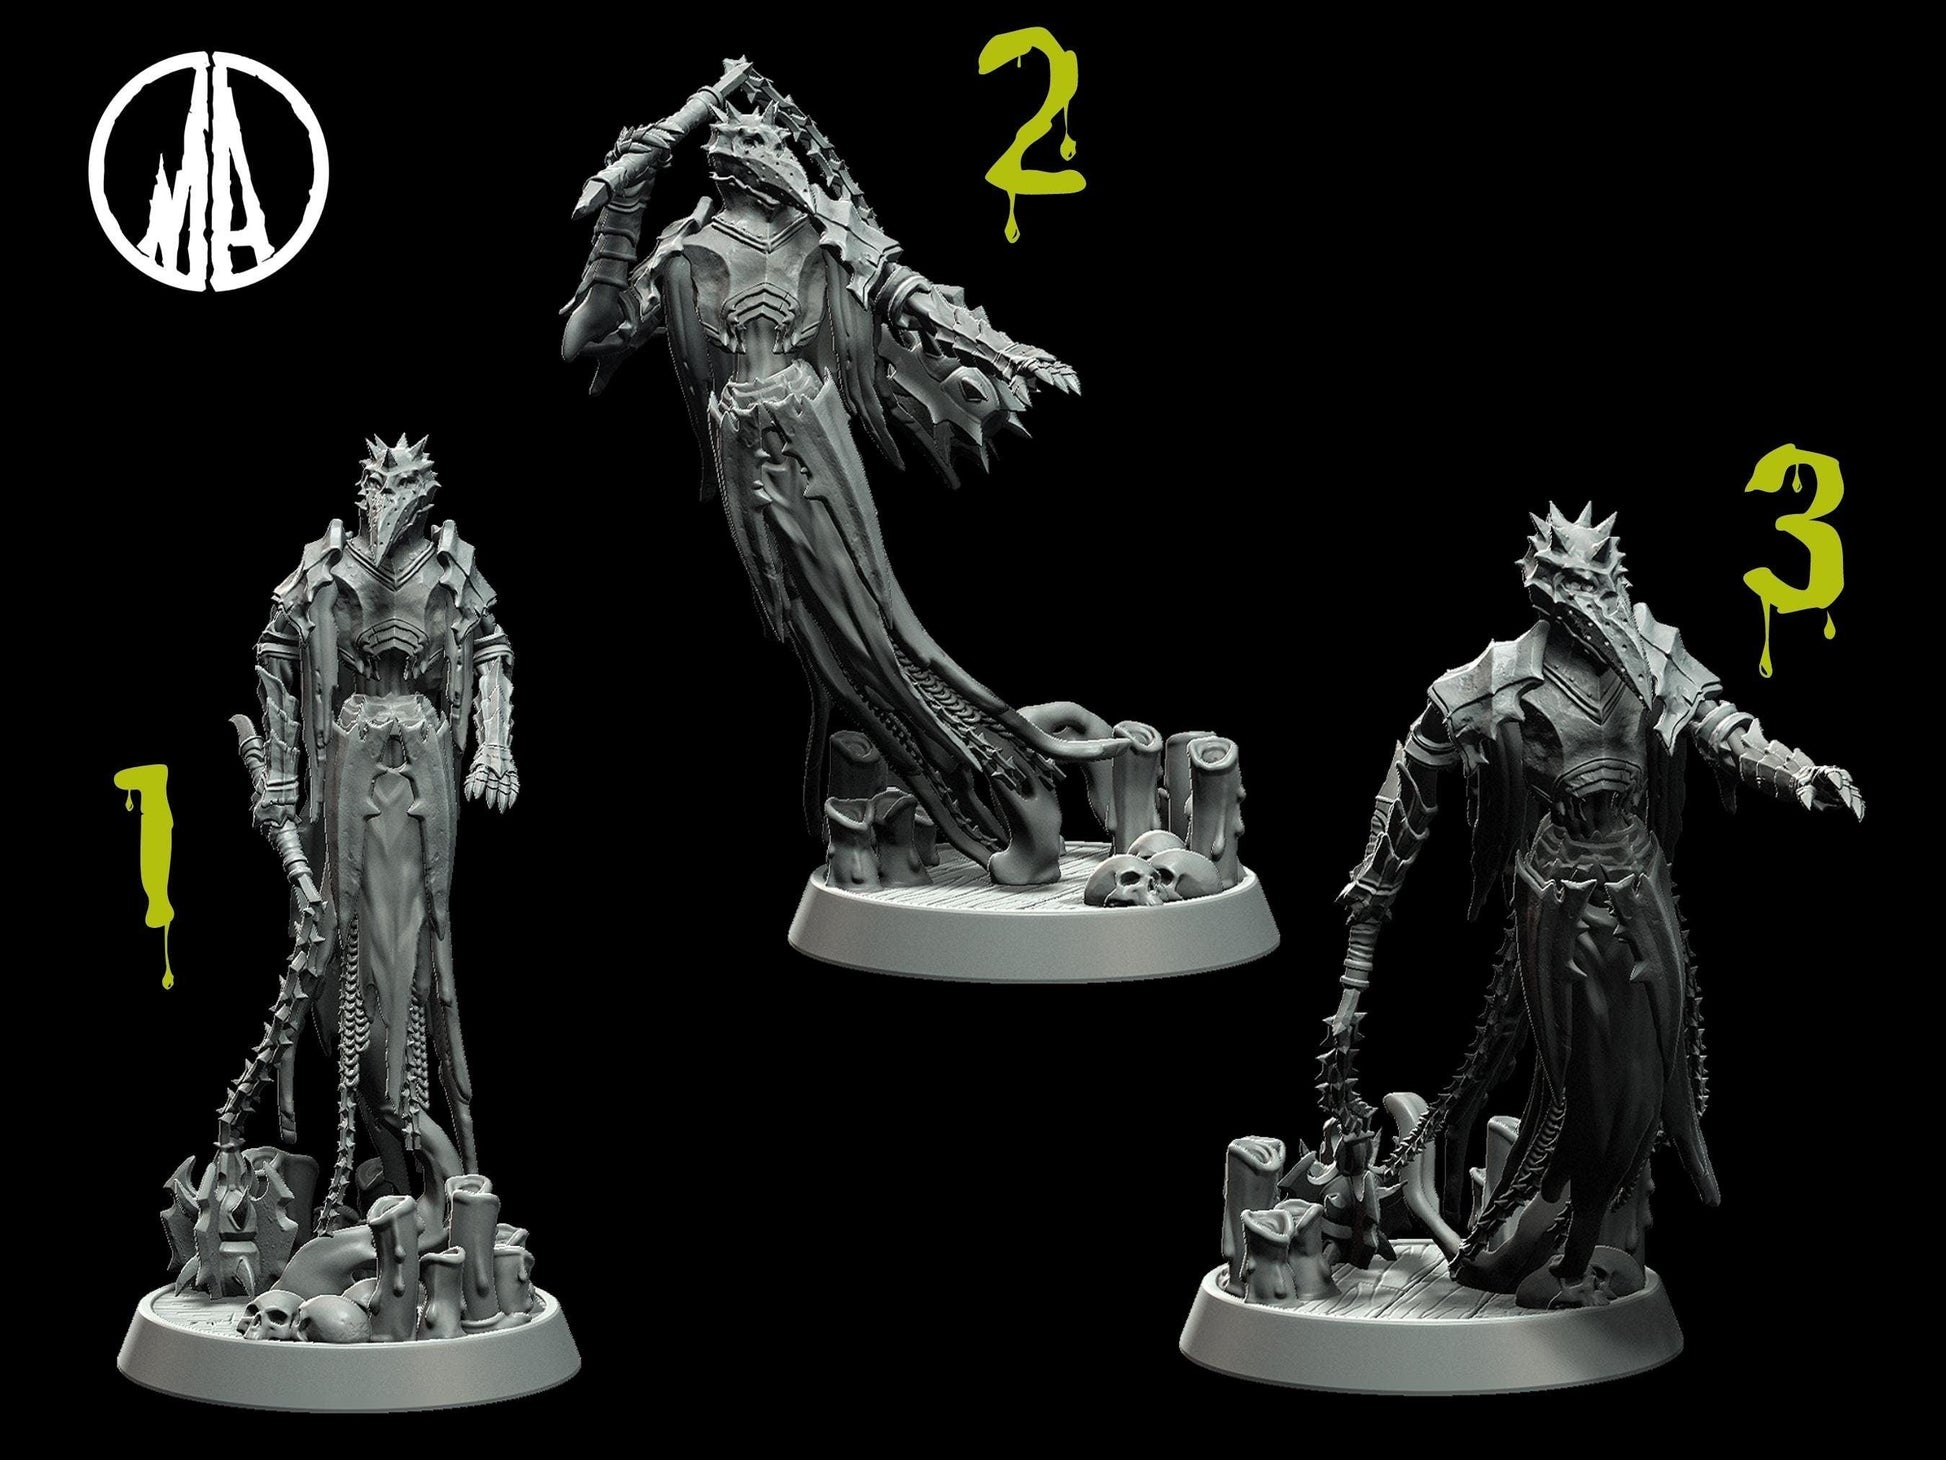 Plagued Wraith Miniature - 3 Poses - 28mm scale Tabletop gaming DnD Miniature Dungeons and Dragons, ttrpg dnd 5e - Plague Miniatures shop for DnD Miniatures